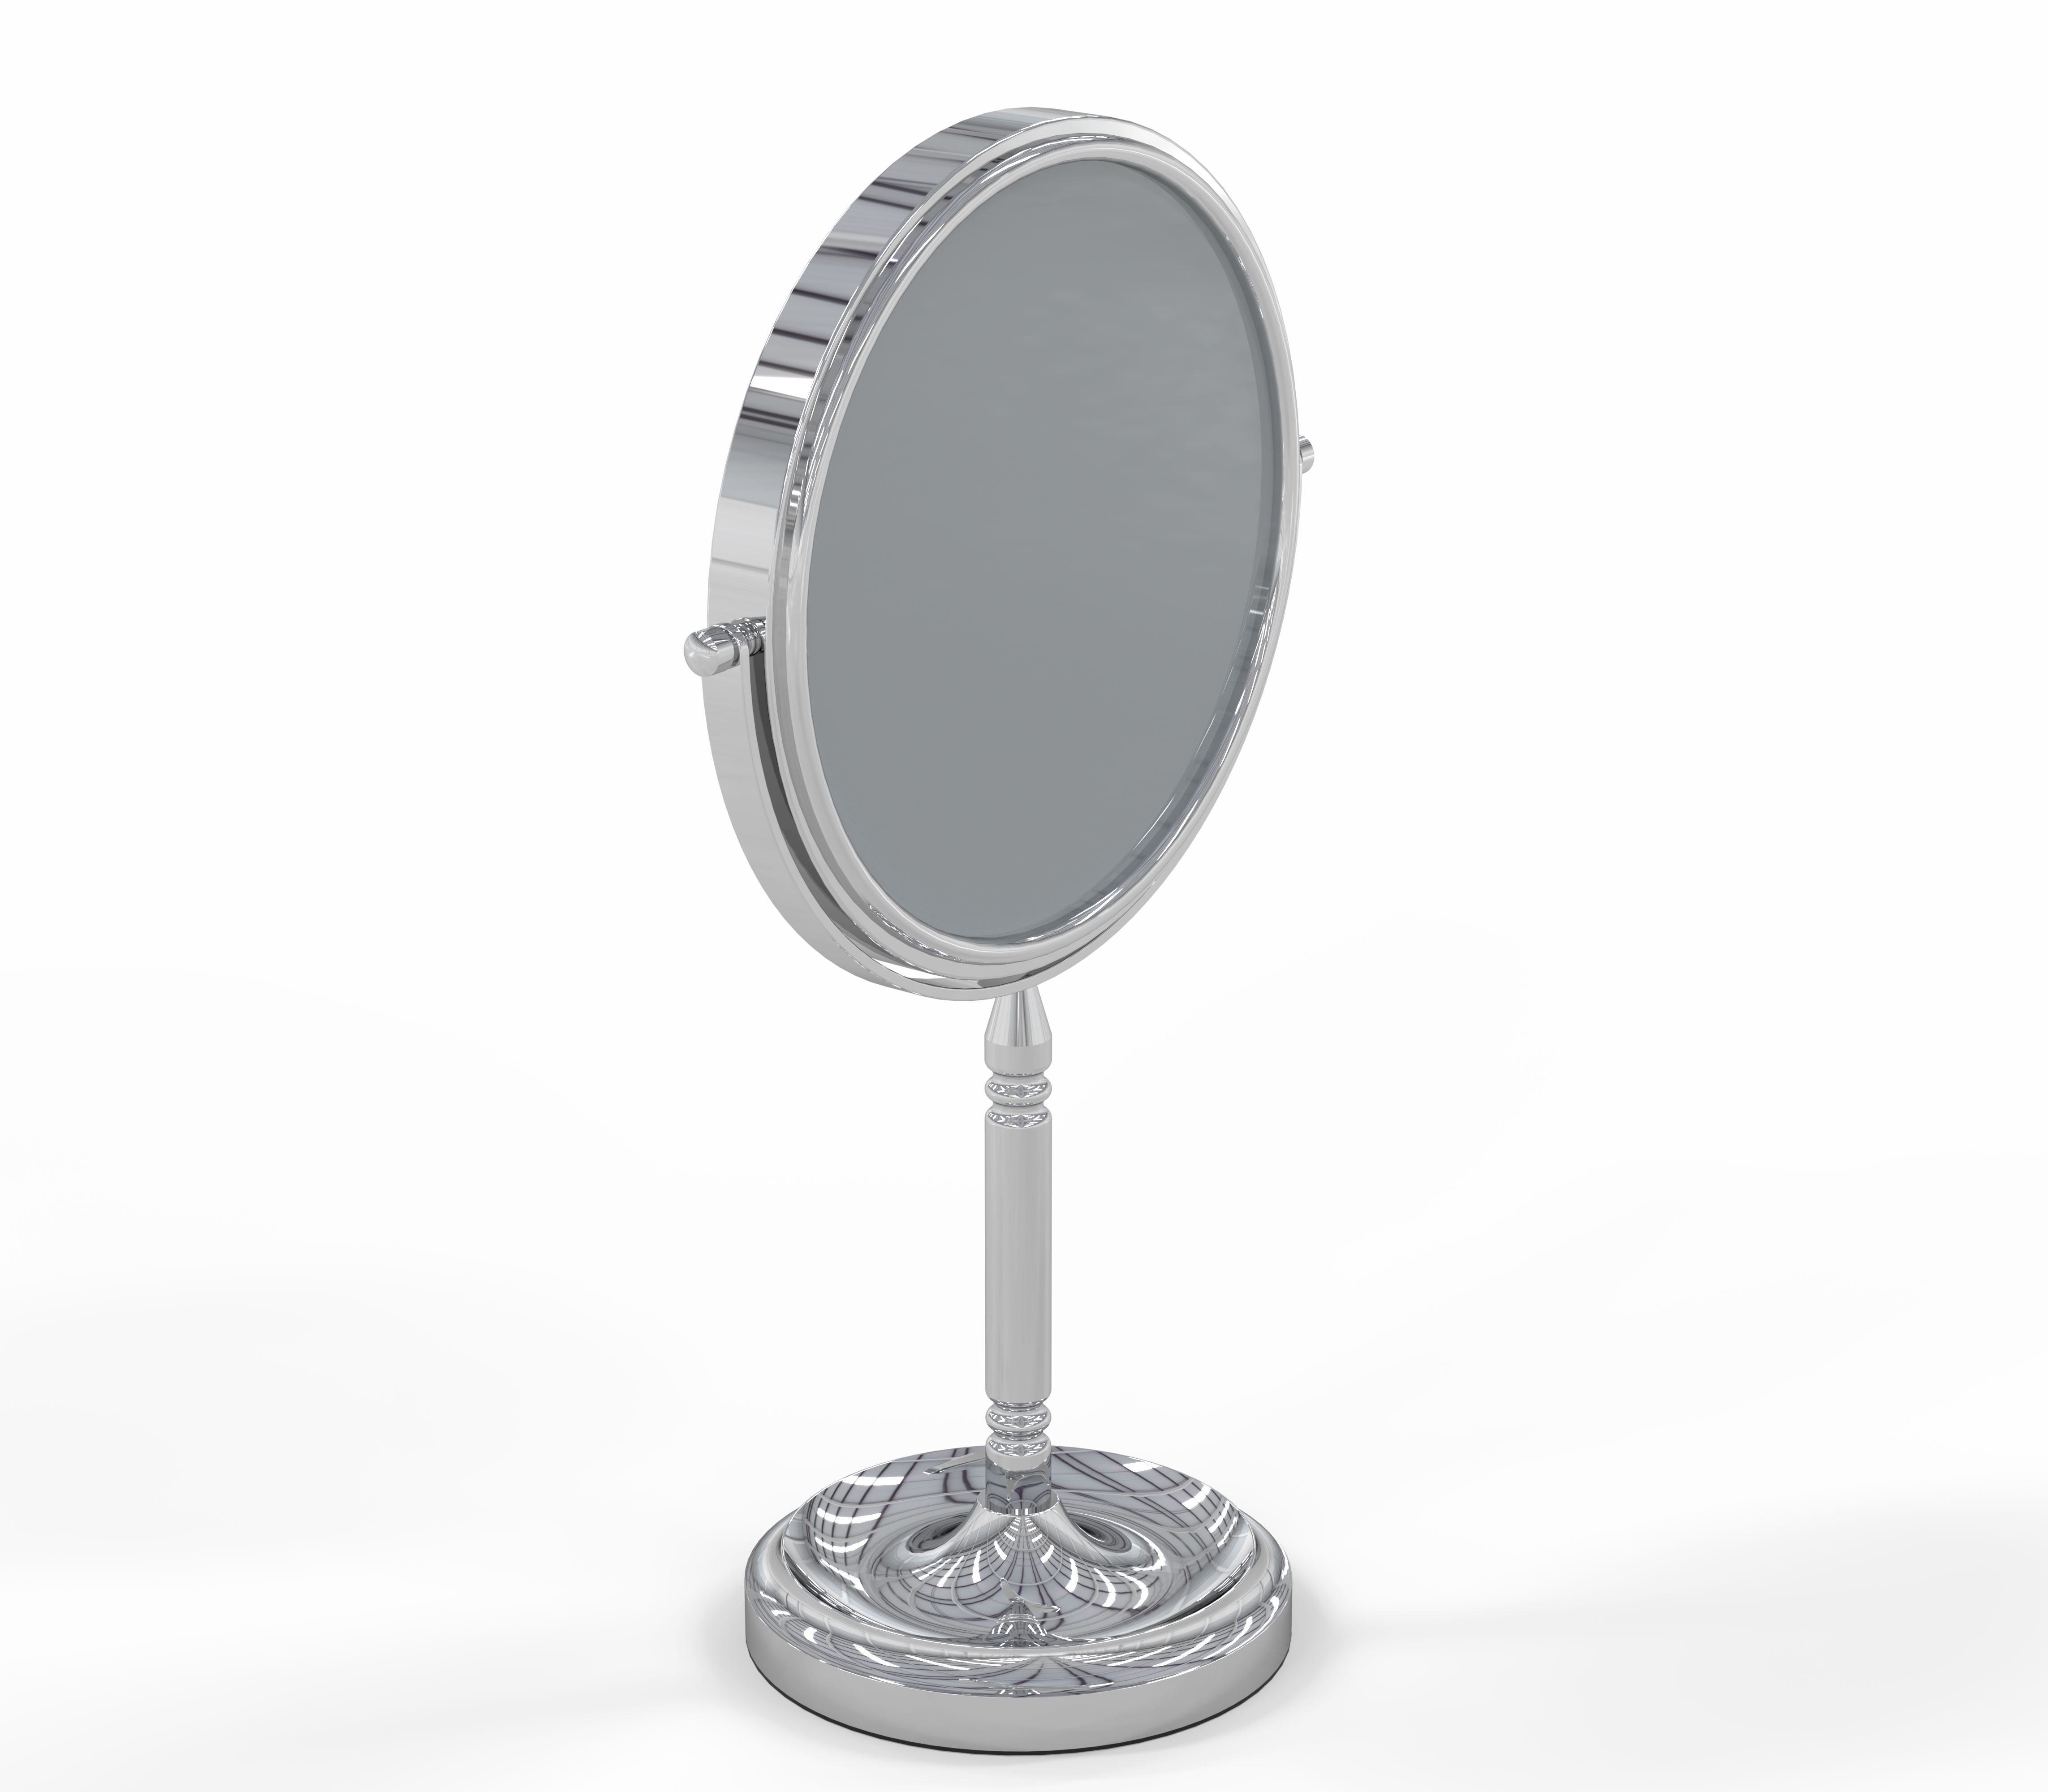 Aptations 86640 Recessed Base Vanity Mirror In Chrome 86640 - Chrome